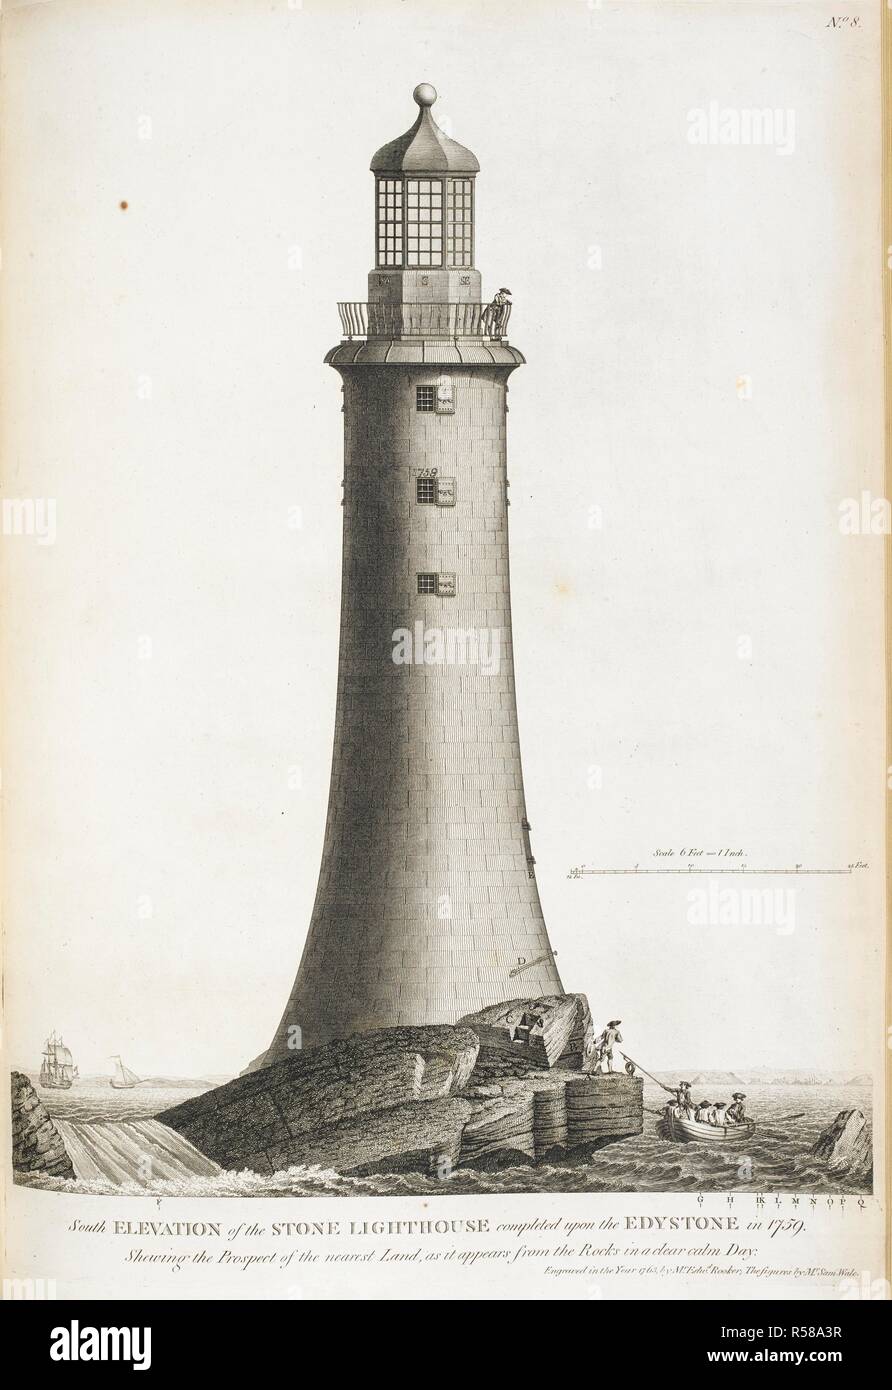 'South elavation of the stone lighthouse, completed upon the Edystone in 1759'. This was the third lighthouse erected on the Eddystone rocks, south of Rame Head, off the coast of Britain. A Narrative of the building, and a description of the construction of the Edystone Lighthouse ... To which is subjoined an appendix, giving some account of the Lighthouse on the Spurn Point. London : G. Nicol, 1791. Source: 191.g.4 plate 8. Author: Smeaton, John. Stock Photo